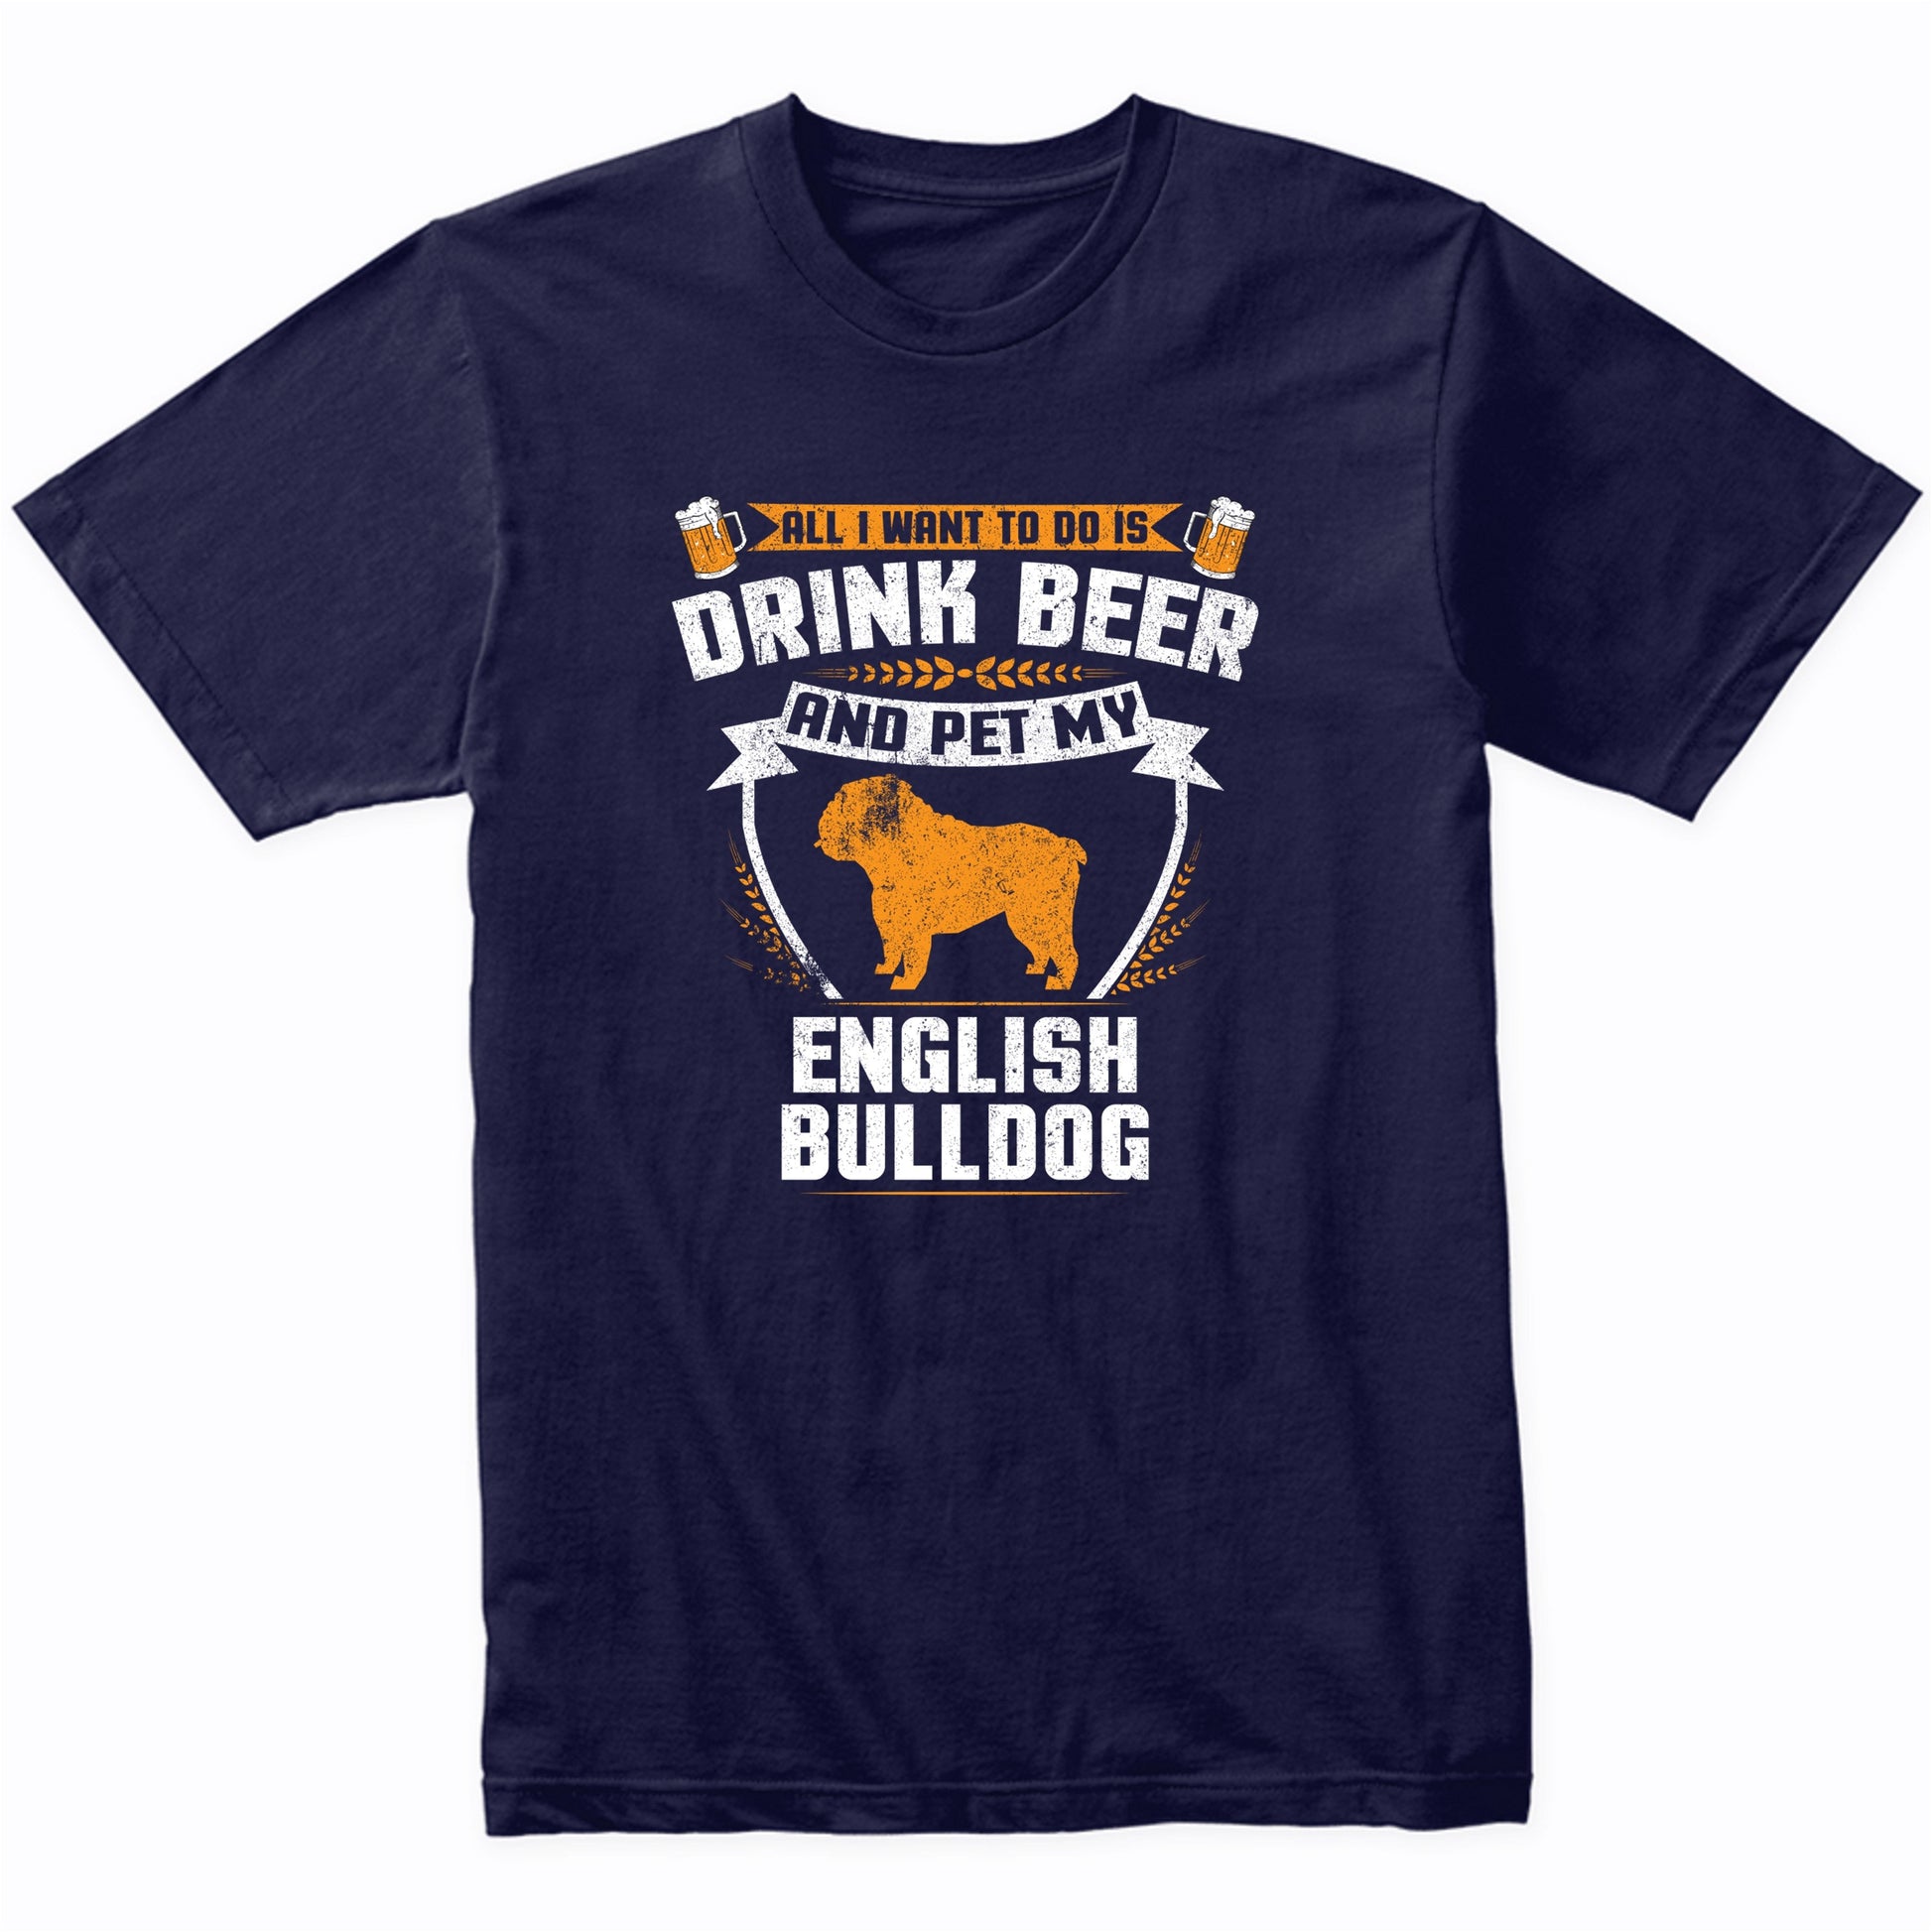 All I Want To Do Is Drink Beer And Pet My English Bulldog Funny Dog Owner Shirt